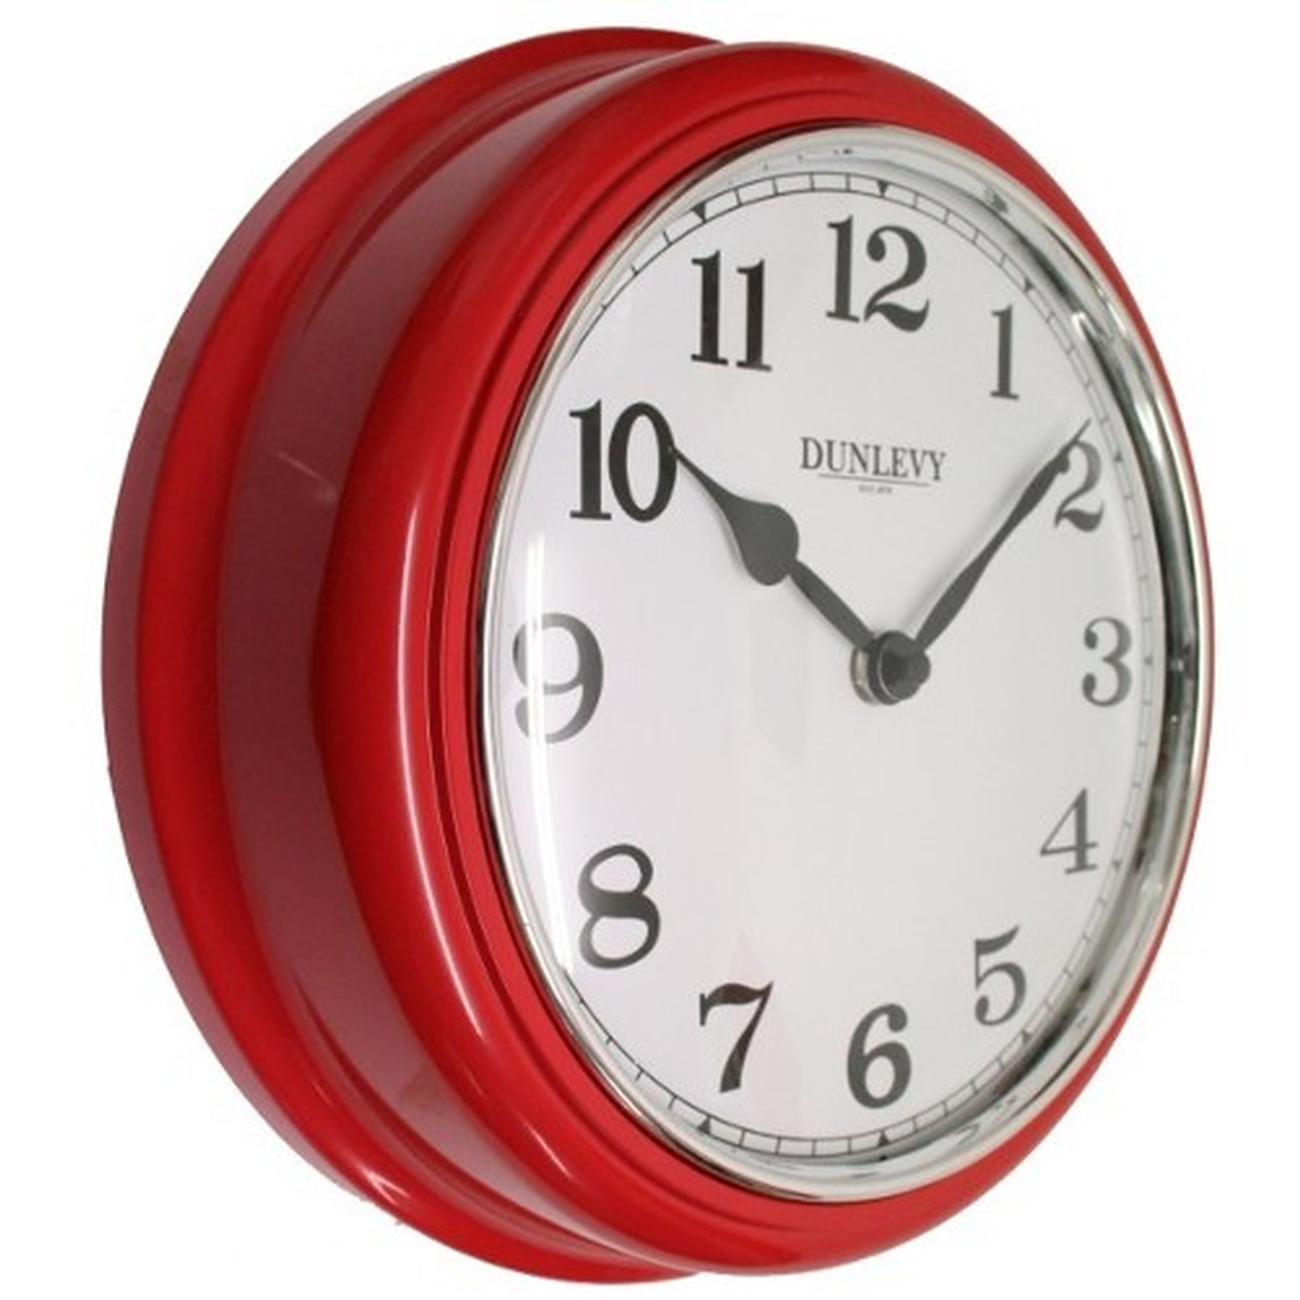 red-deep-wall-clock-10in-plastic-dunlevy - Dunlevy Deep Wall Clock Plastic Red 10in